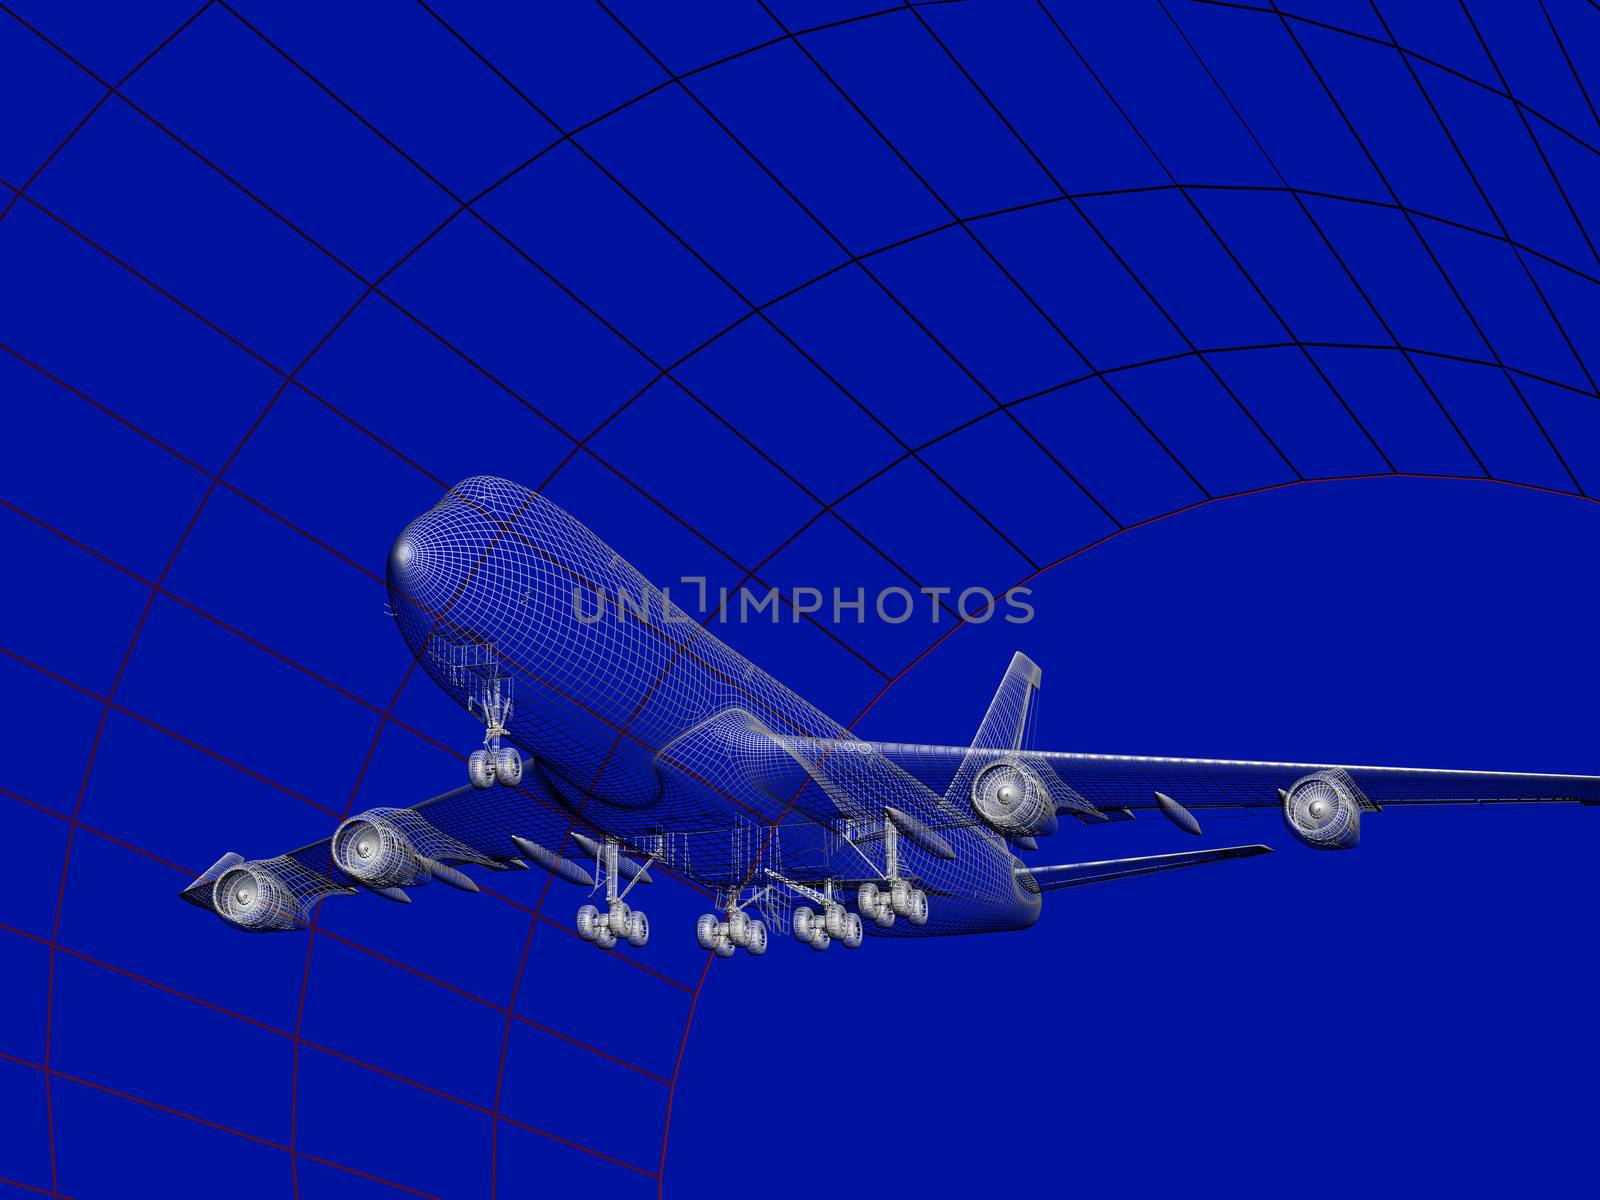 Simulation of an aircraft model being analyzed in wind tunnel for aerodynamic effects on its structure